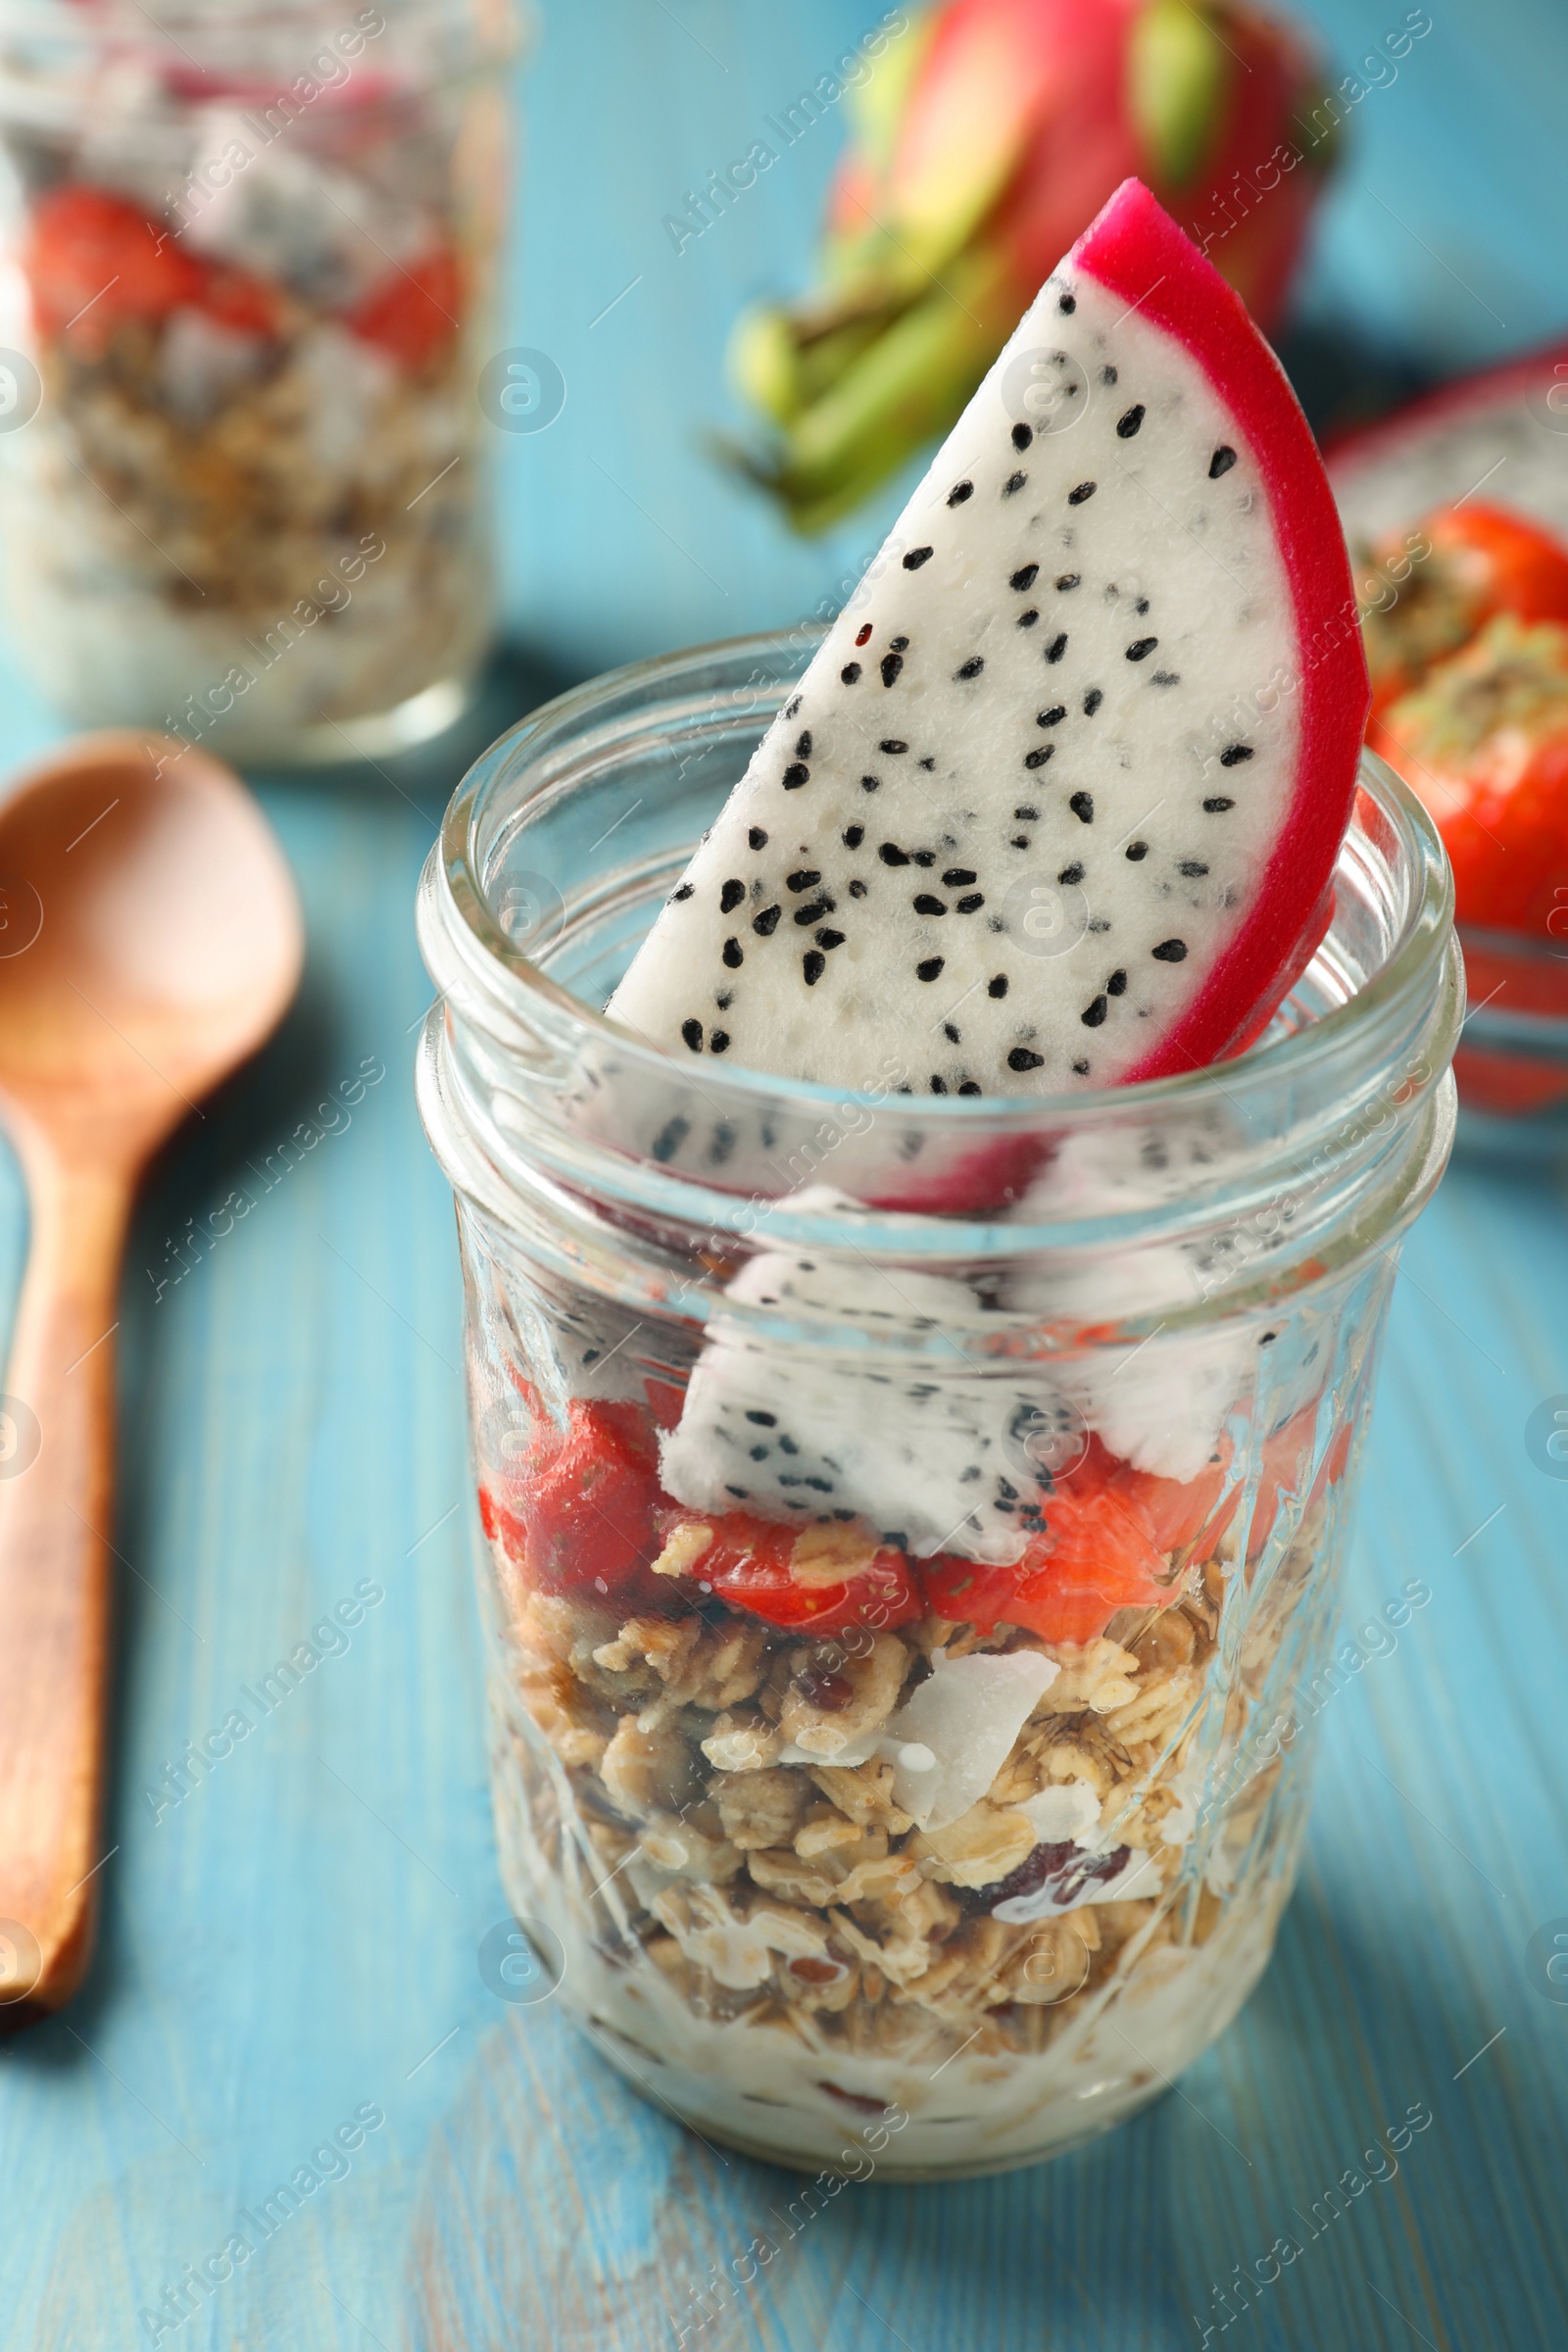 Photo of Granola with strawberries and pitahaya in glass jar on light blue wooden table